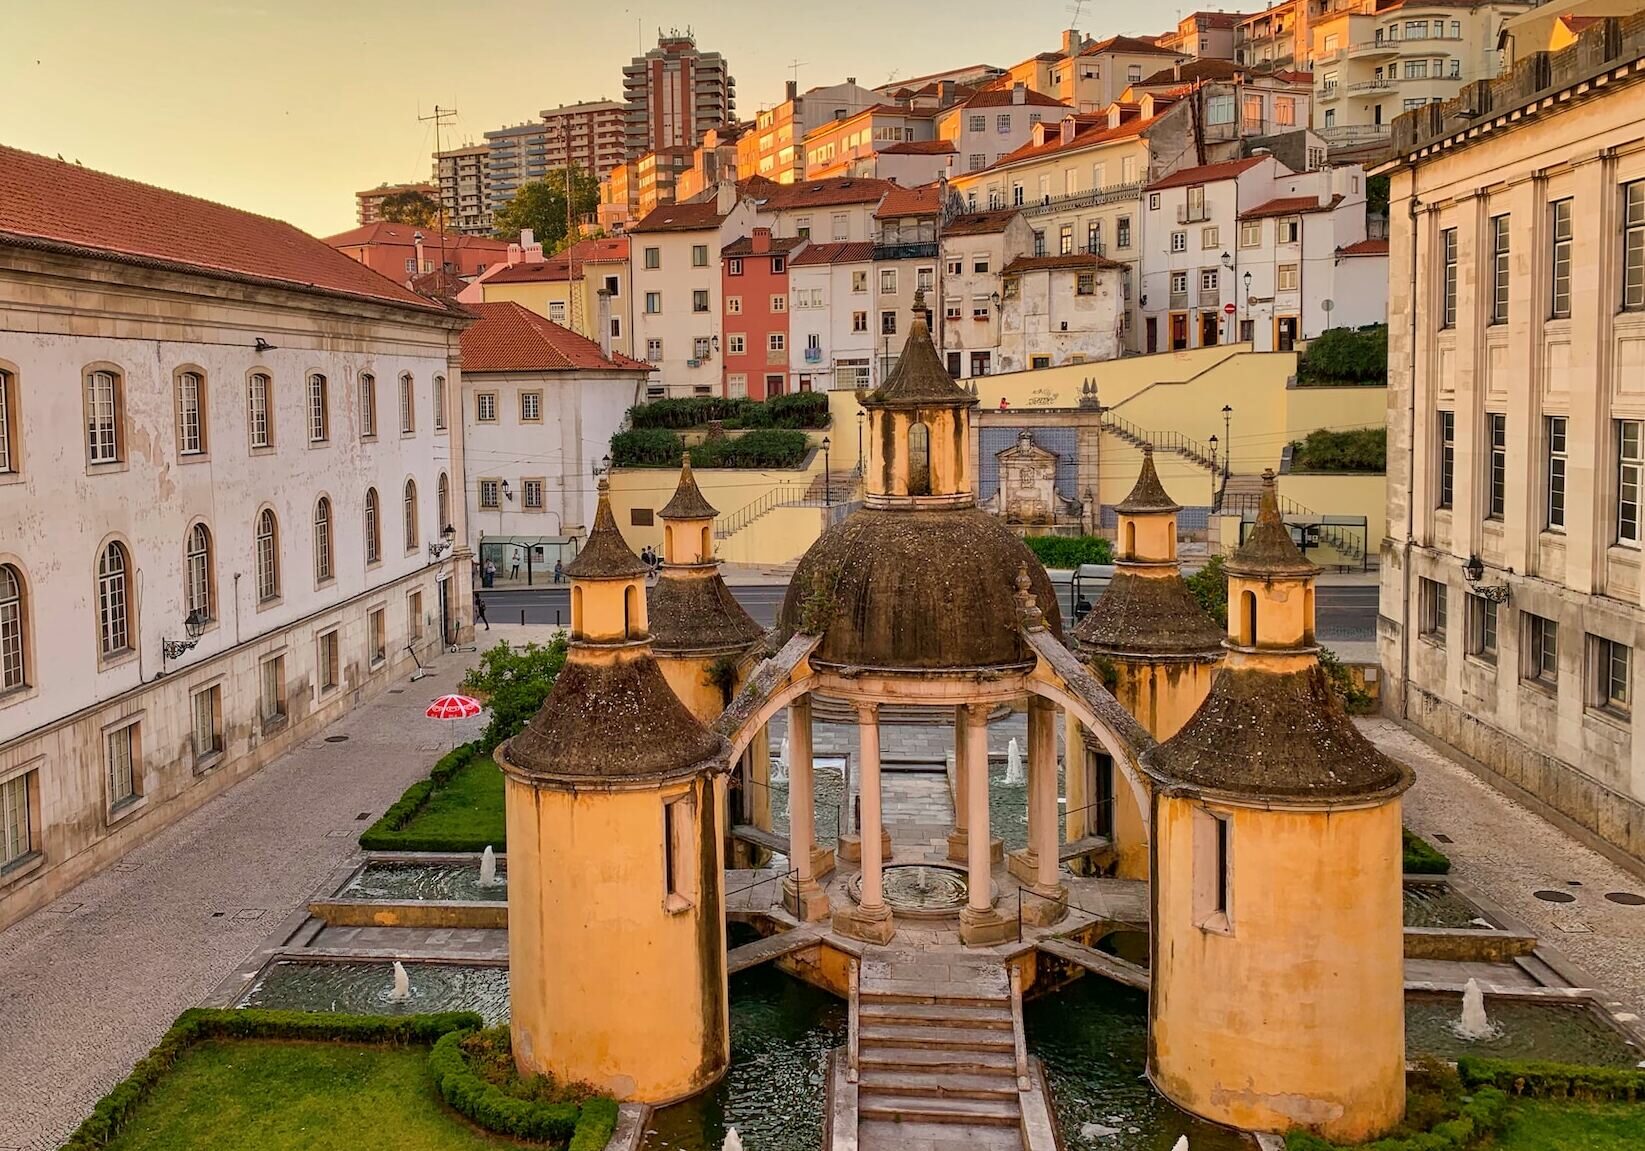 the history of coimbra